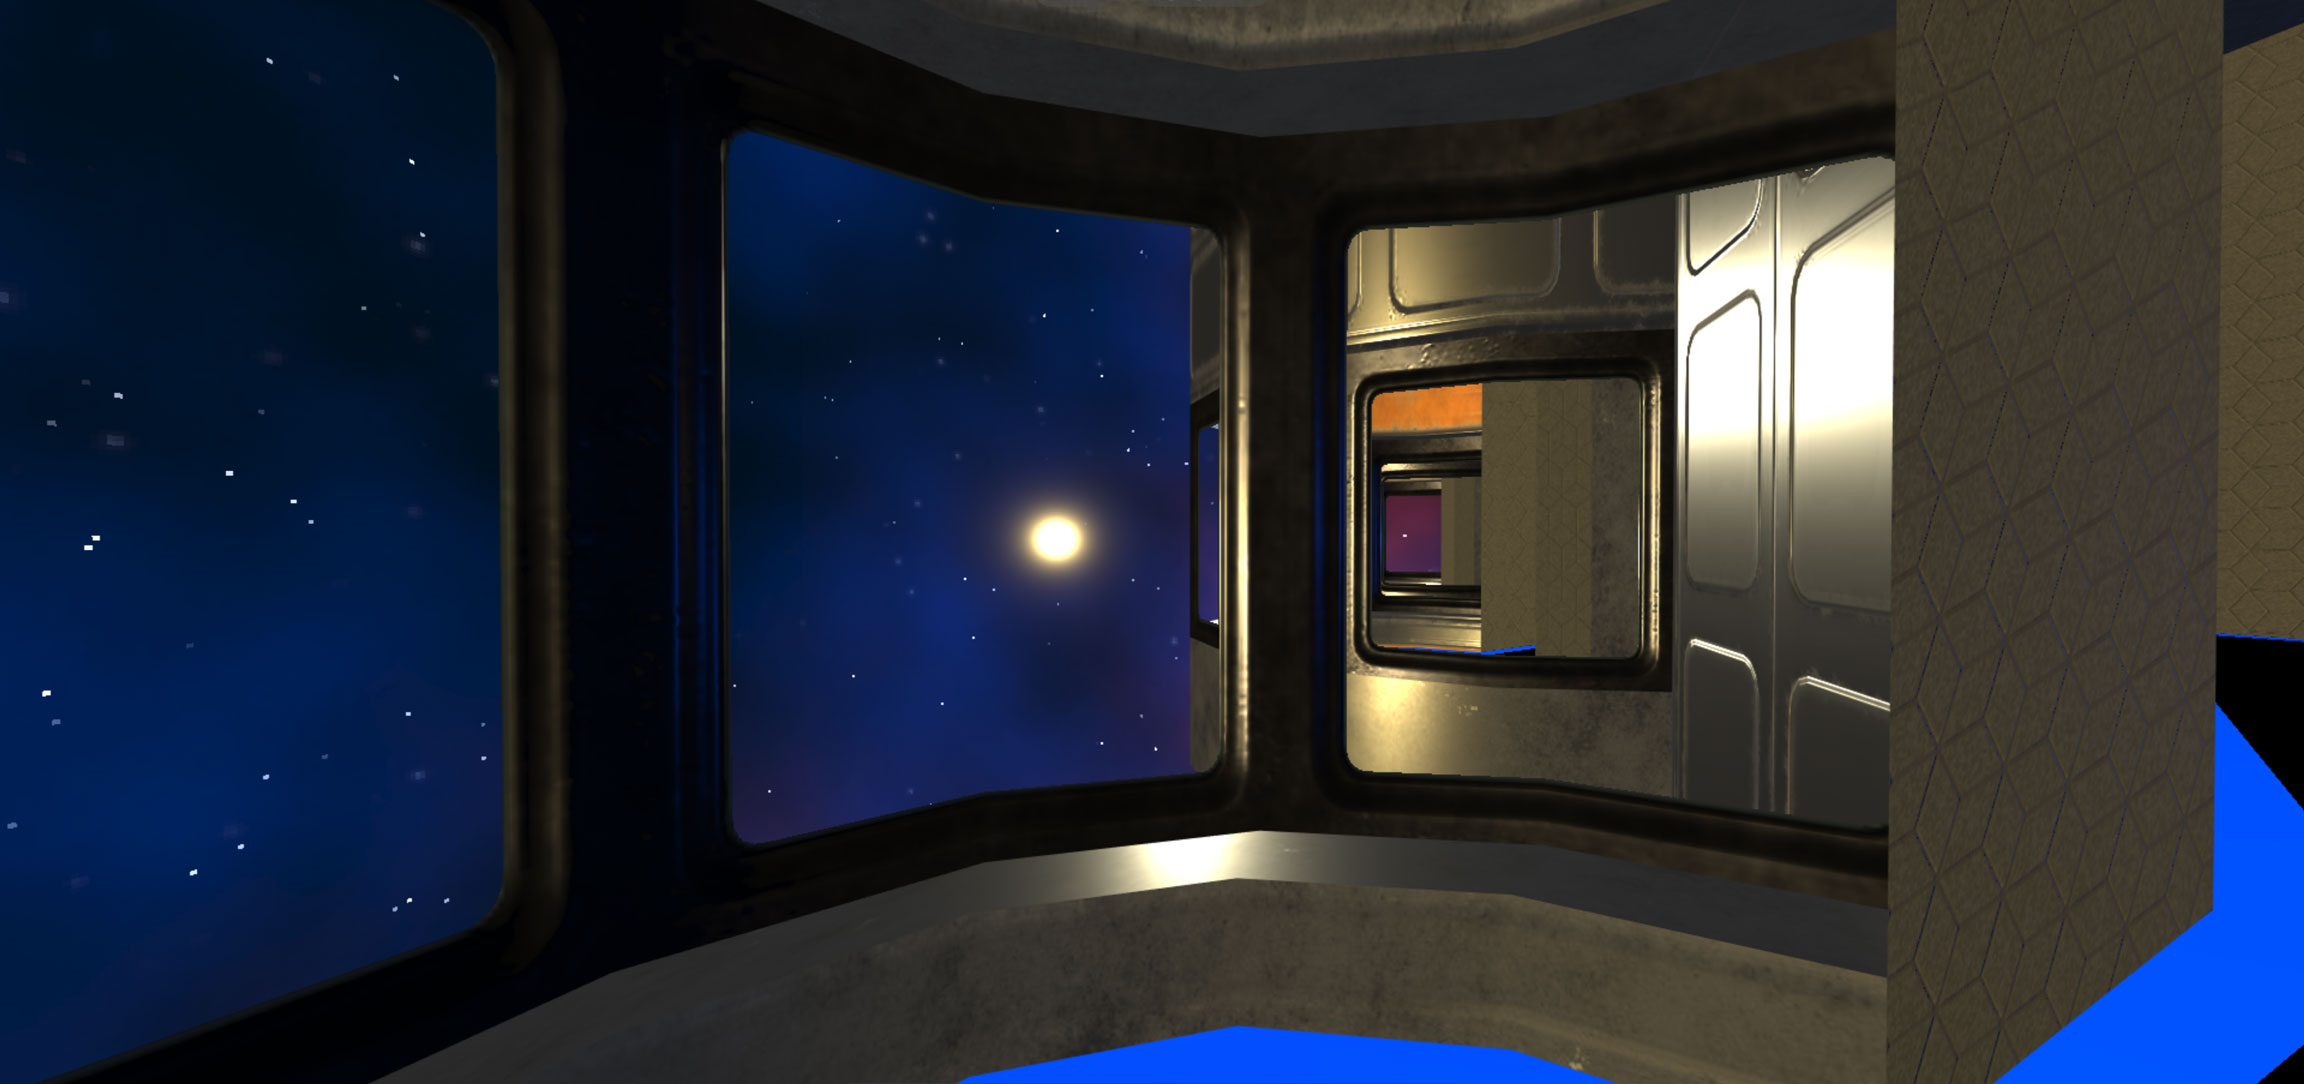 A view looking out of the space station windows at a star or sun. 